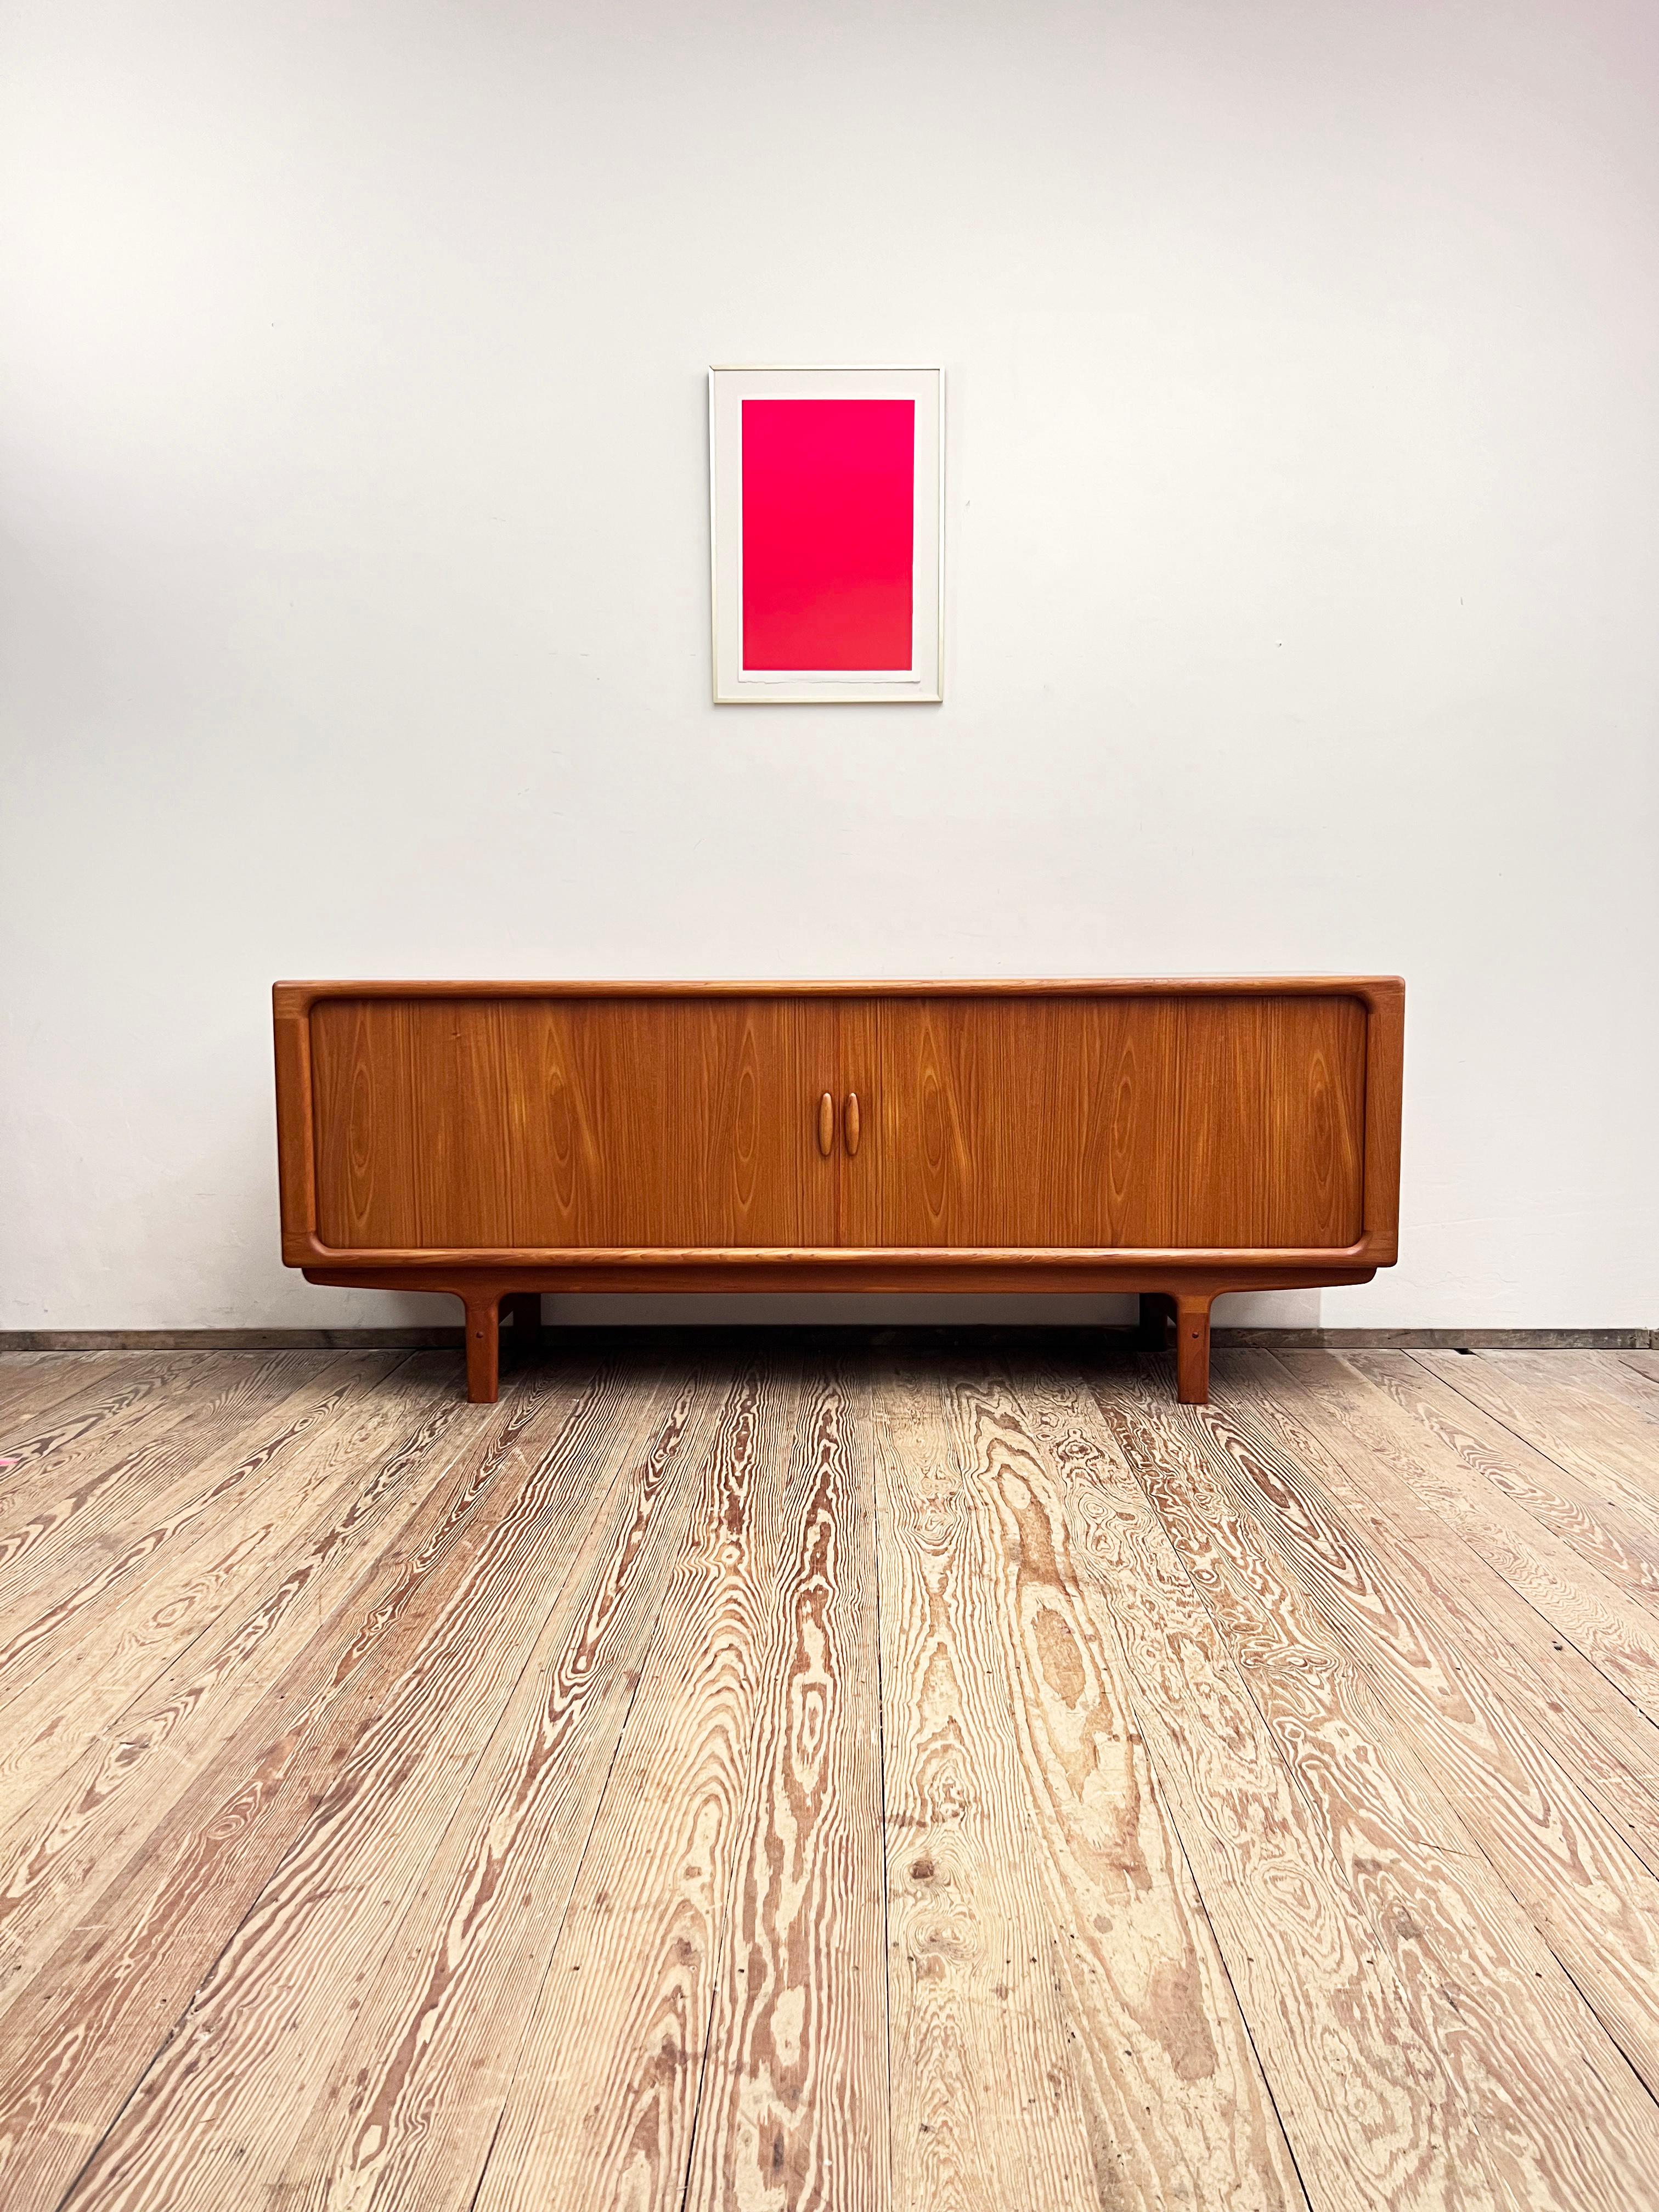 Dimensions: 220x53x86 cm (Width x Depth x Height)

This Scandinavian design sideboard or TV console was manufactured in the 1960s by Danish premium manufacturer Dylund in Denmark.

The mid-century Credenza showcases exquisite Danish design and